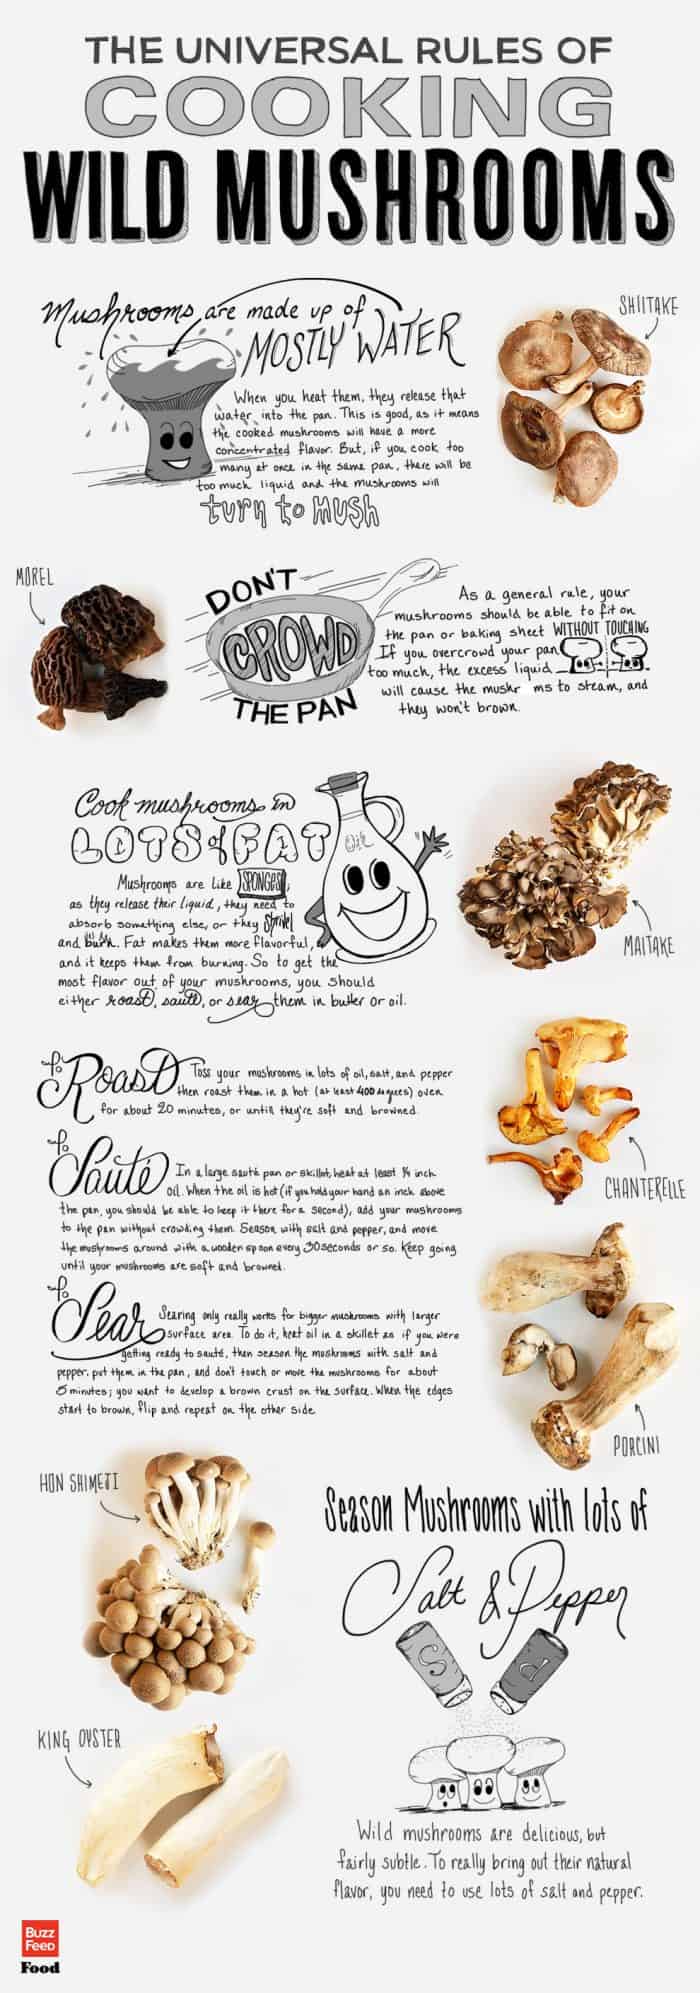 Rules of cooking wild mushrooms infographic